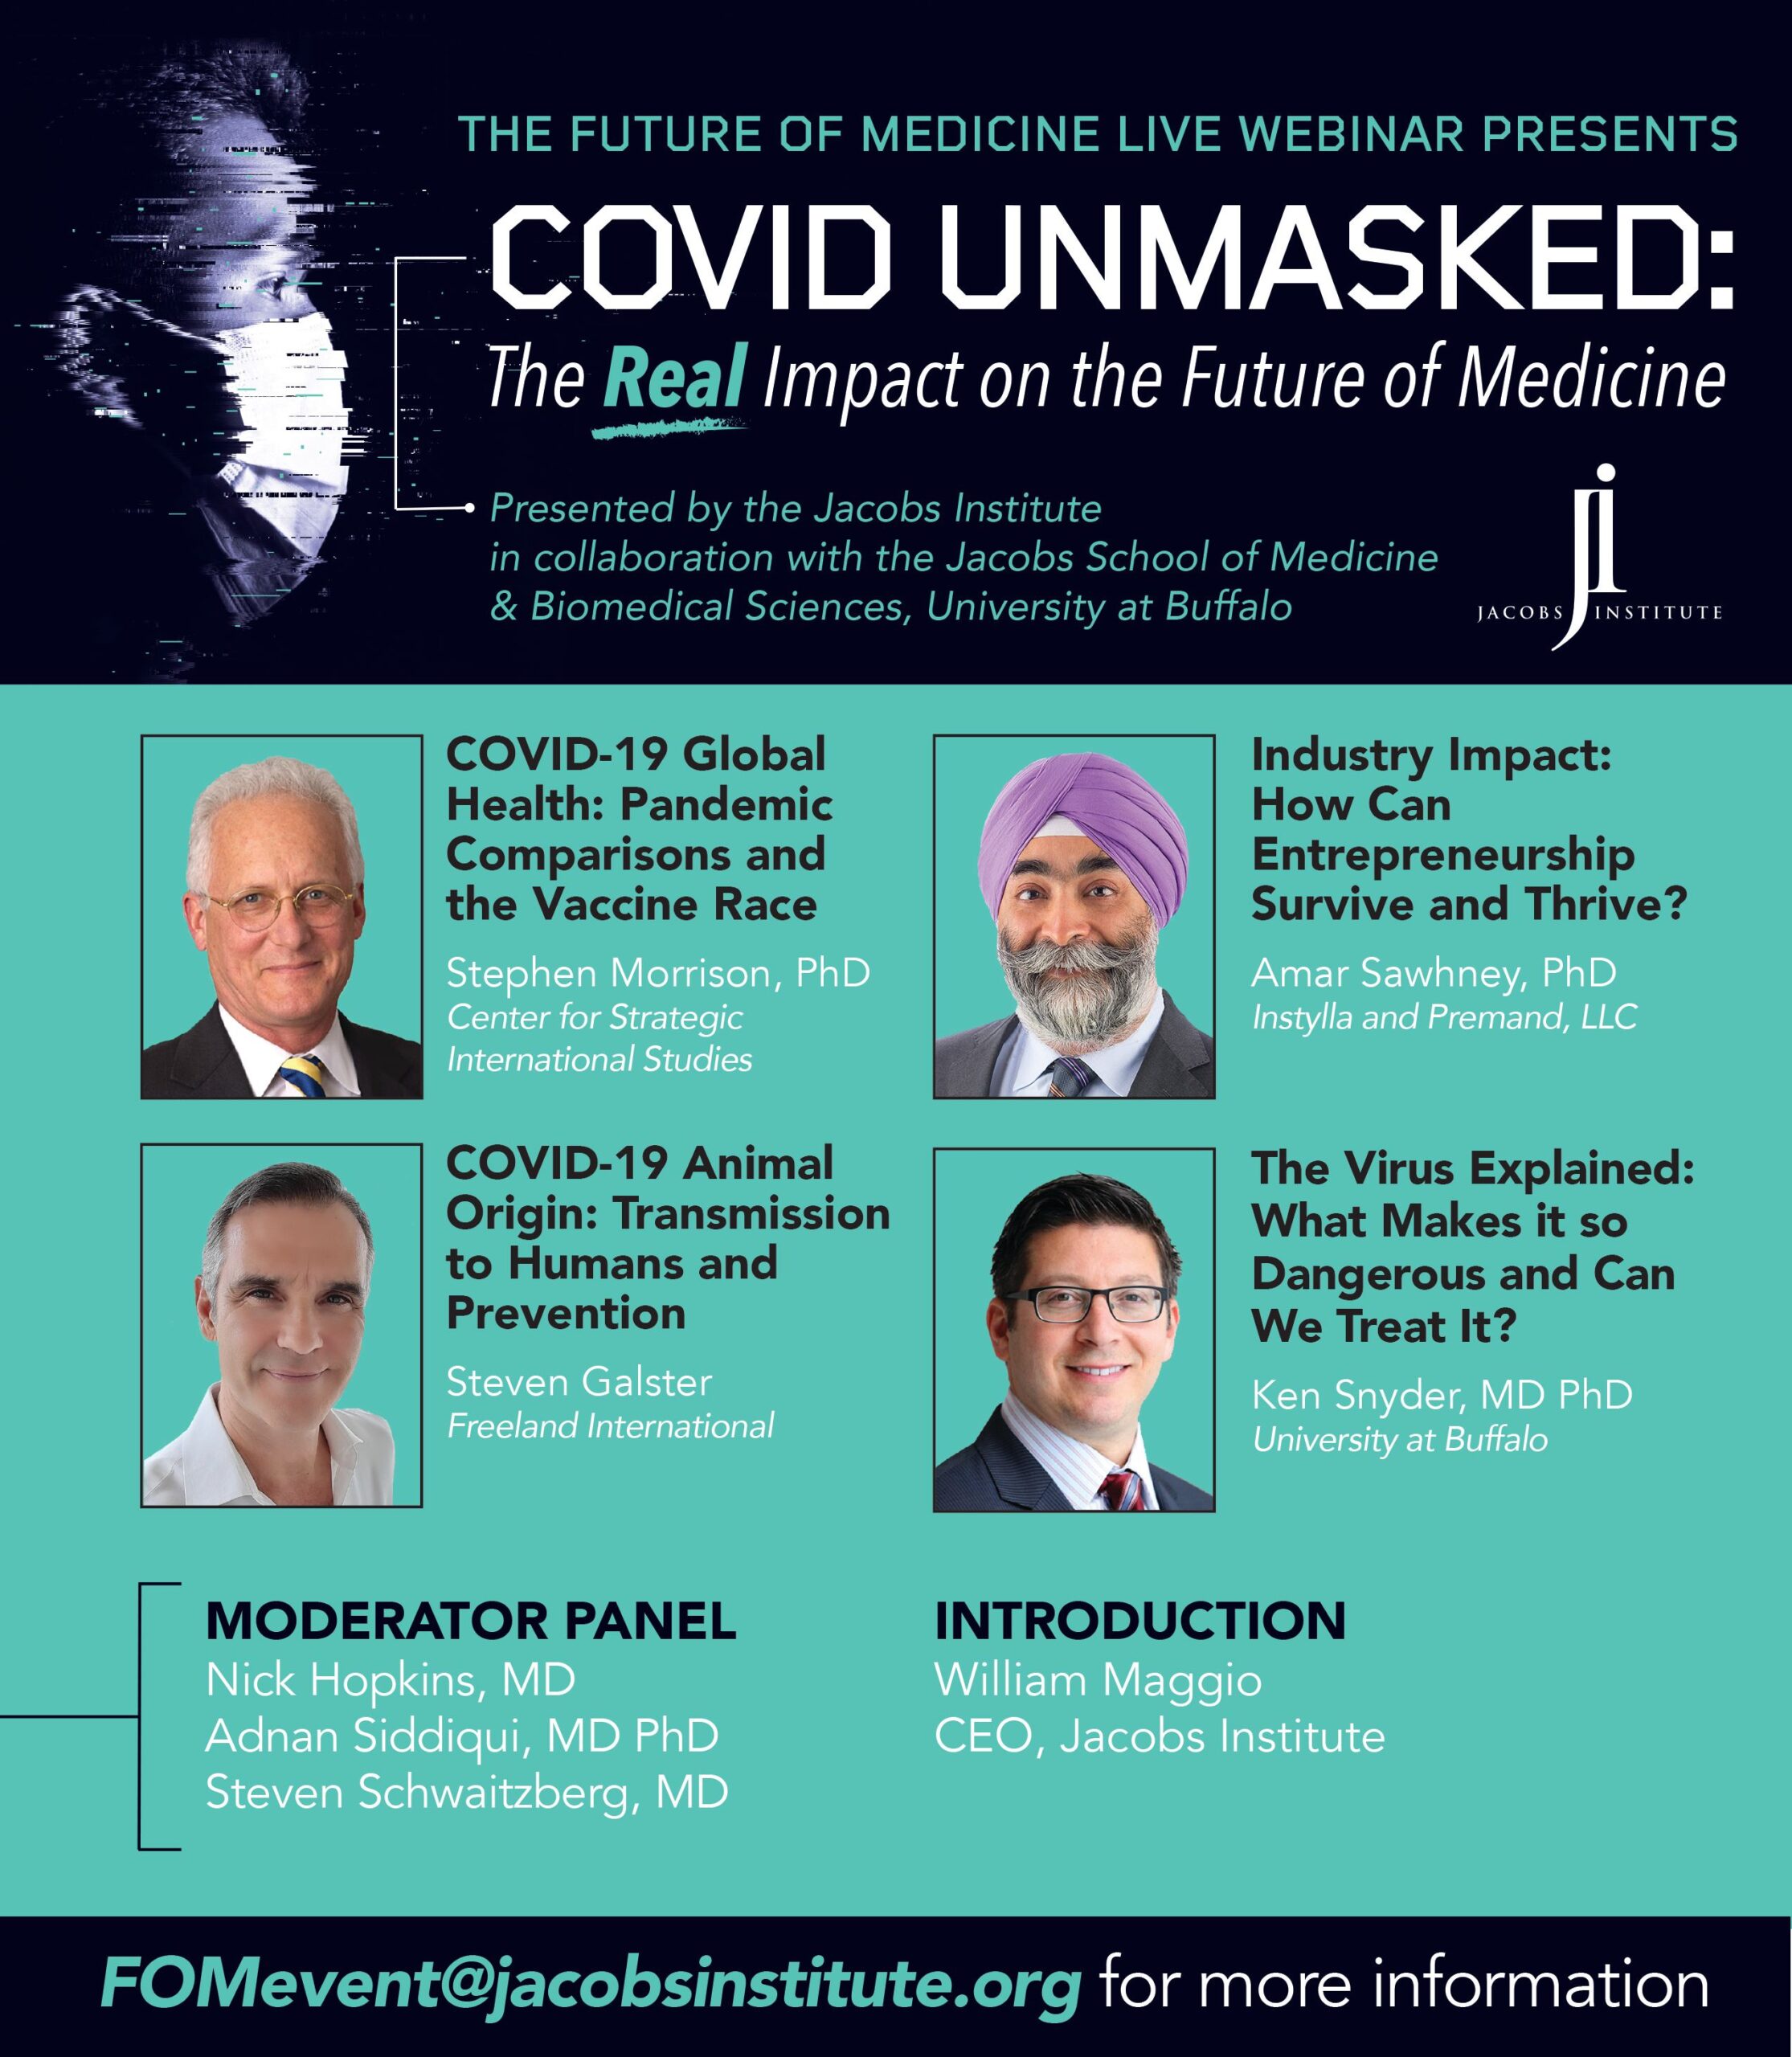 Covid Unmasked